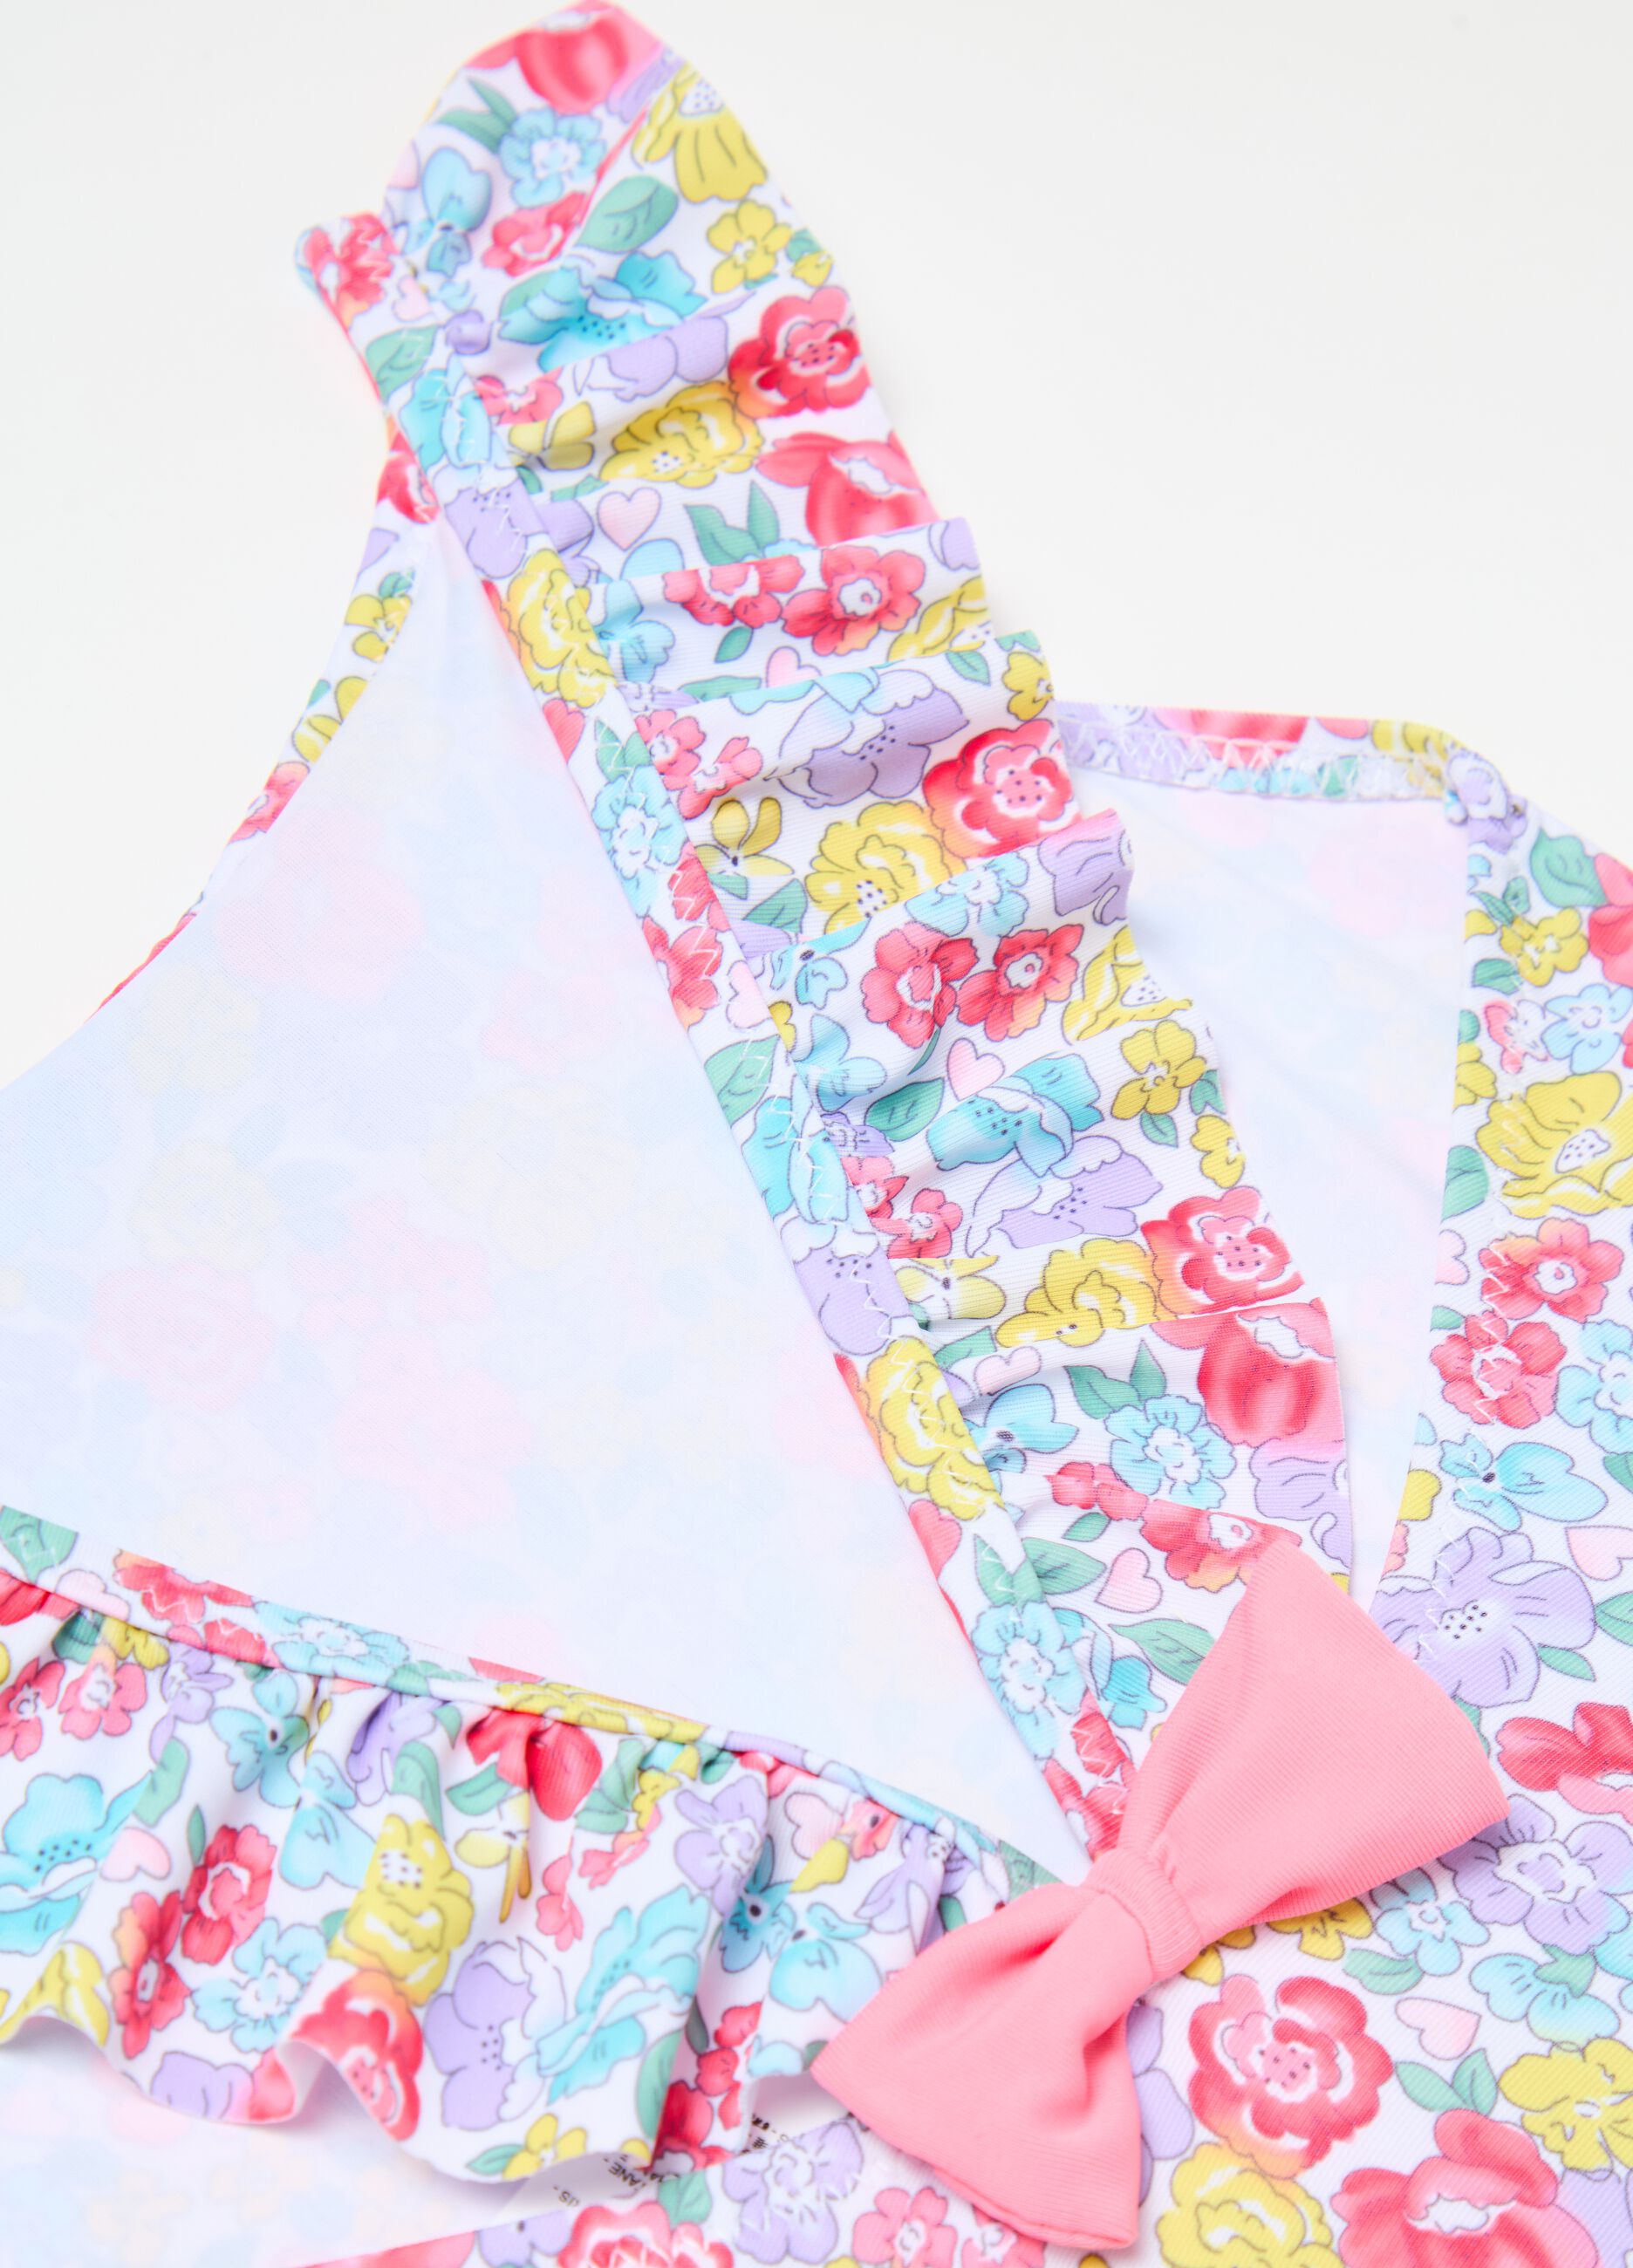 One-piece swimsuit with floral pattern